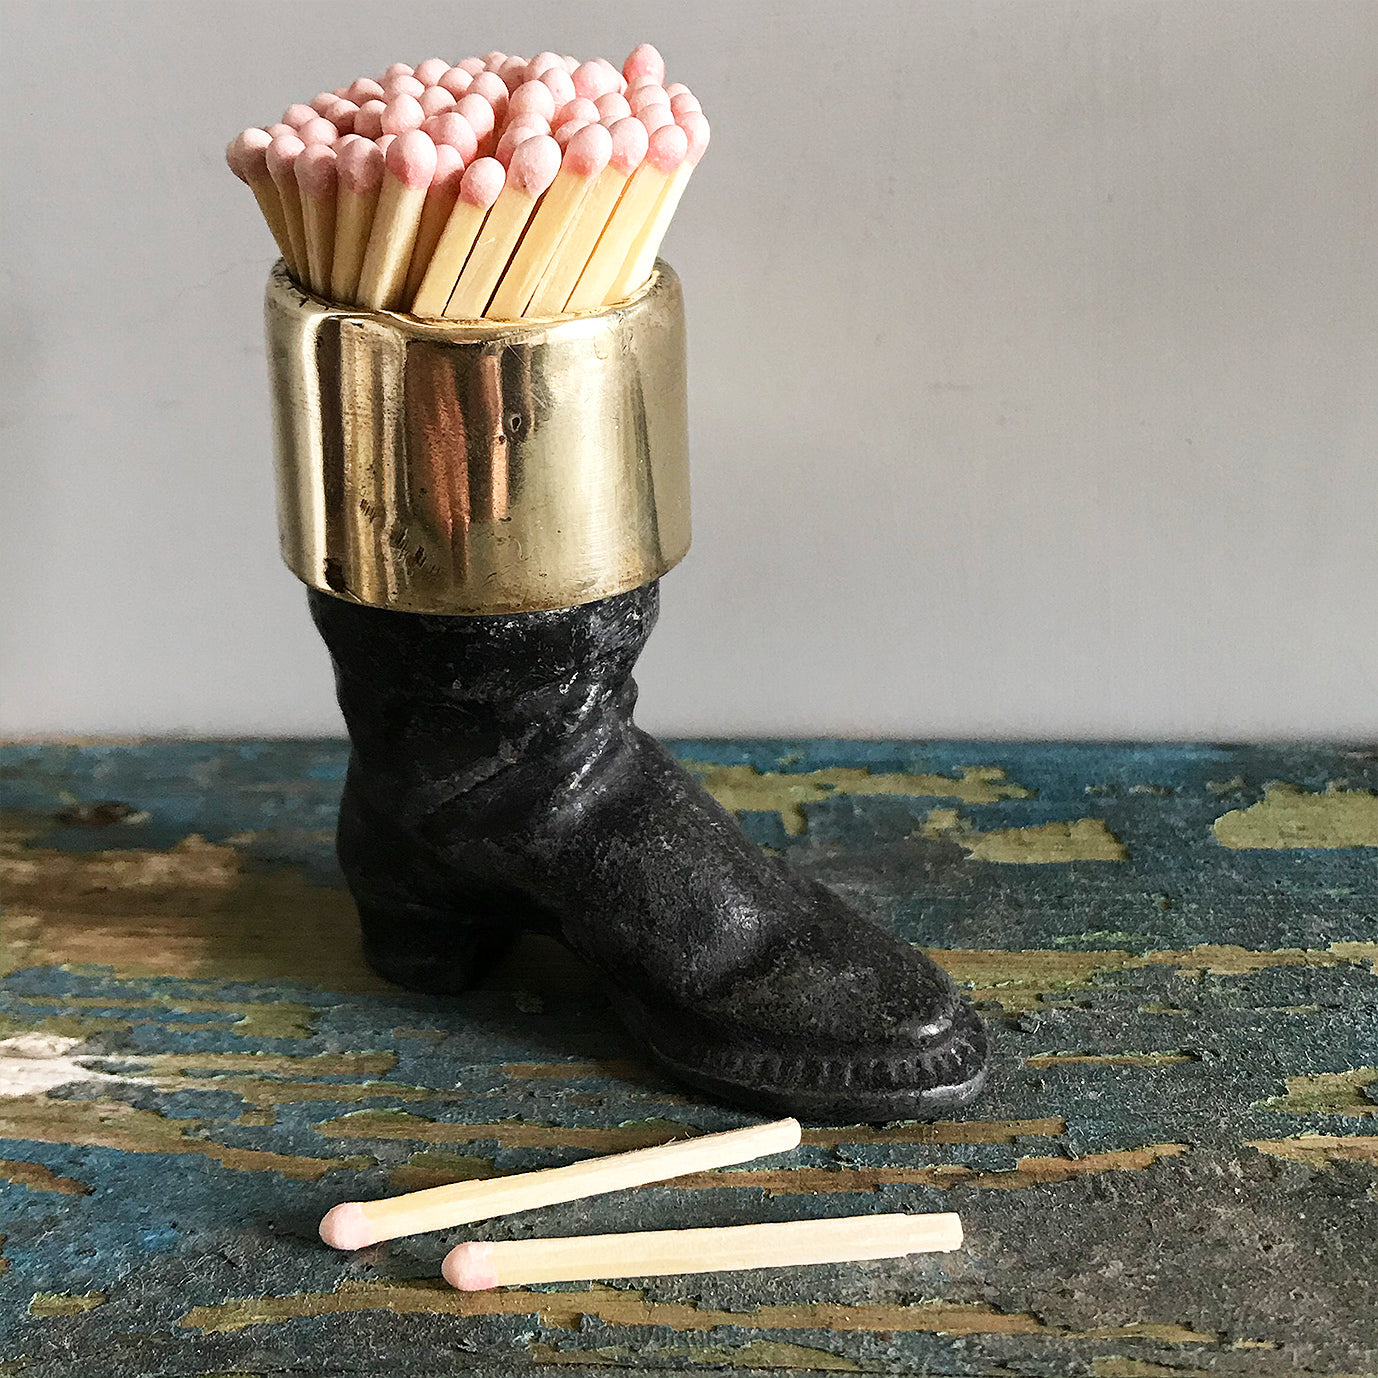 Well modelled Victorian vesta case of an old boot. Cast from metal with a brass cuff it has a striker on its sole to light your match - SHOP NOW - www.intovintage.co.uk